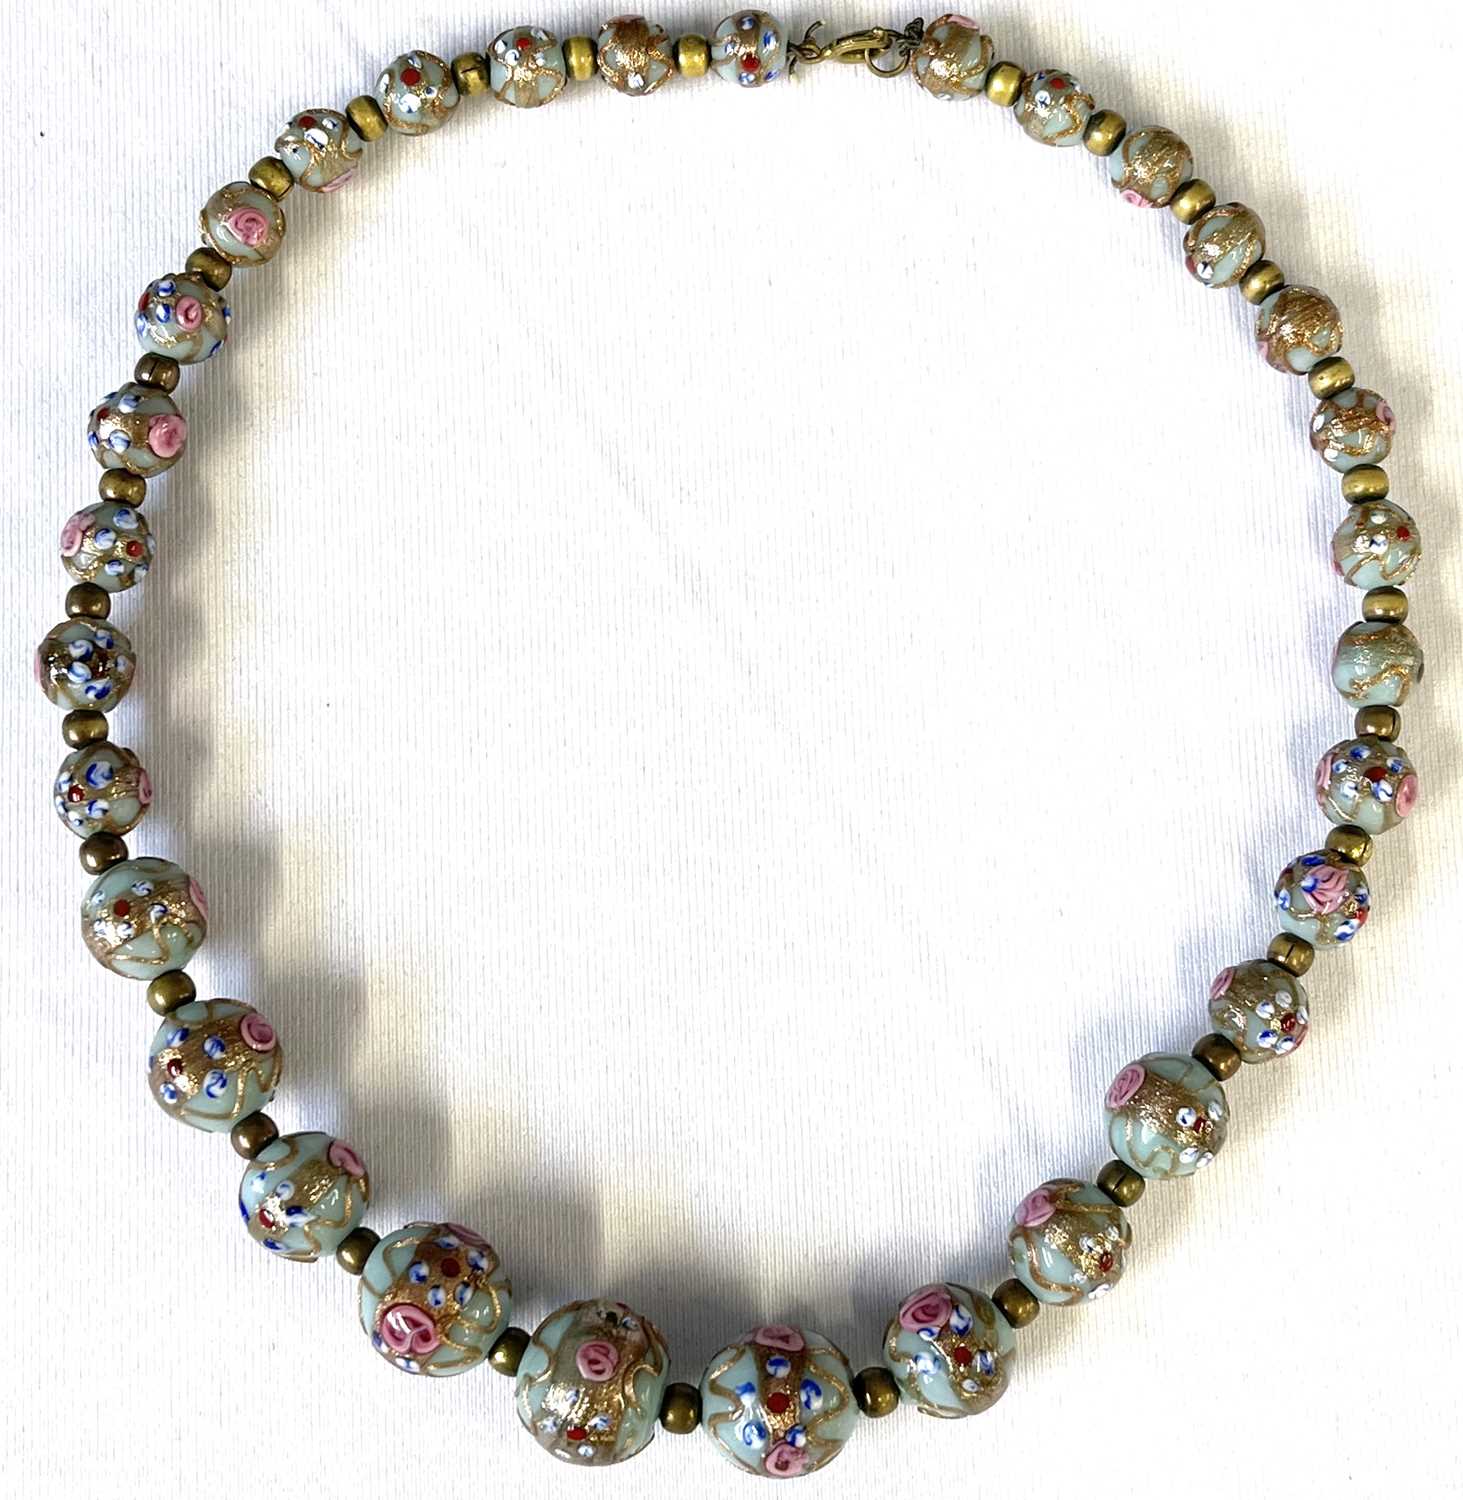 A 1950's graduated Murano glass bead necklace with hand painted floral patterns on aqua ground - Image 3 of 4